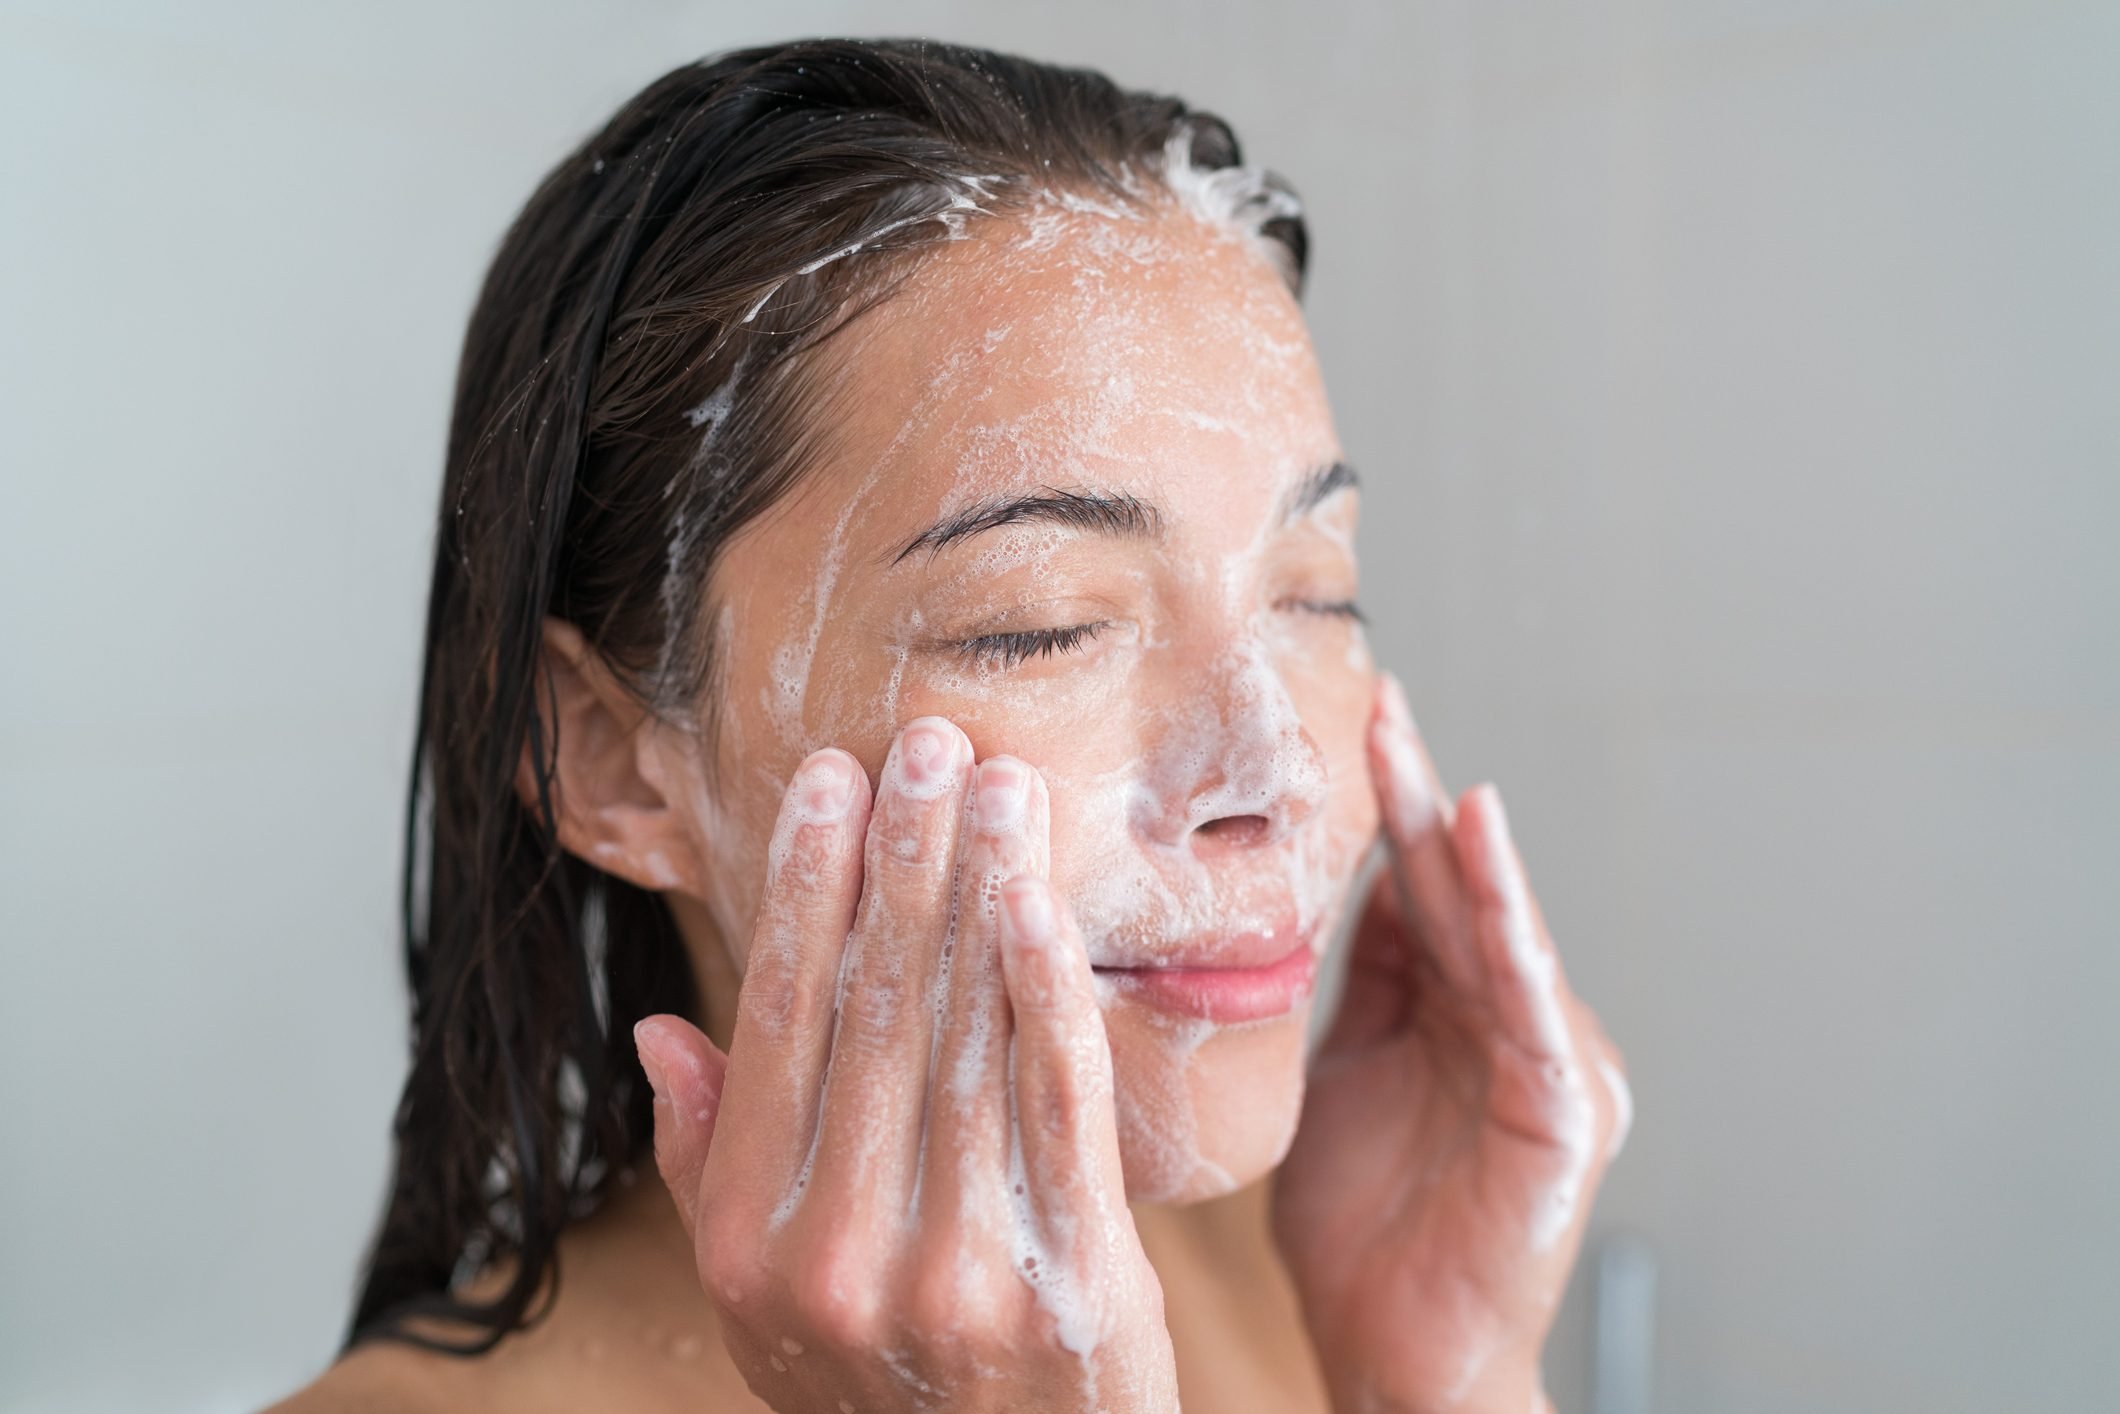 How Bad Is It to Wash Your Face in the Shower? Skin Care Experts Explain